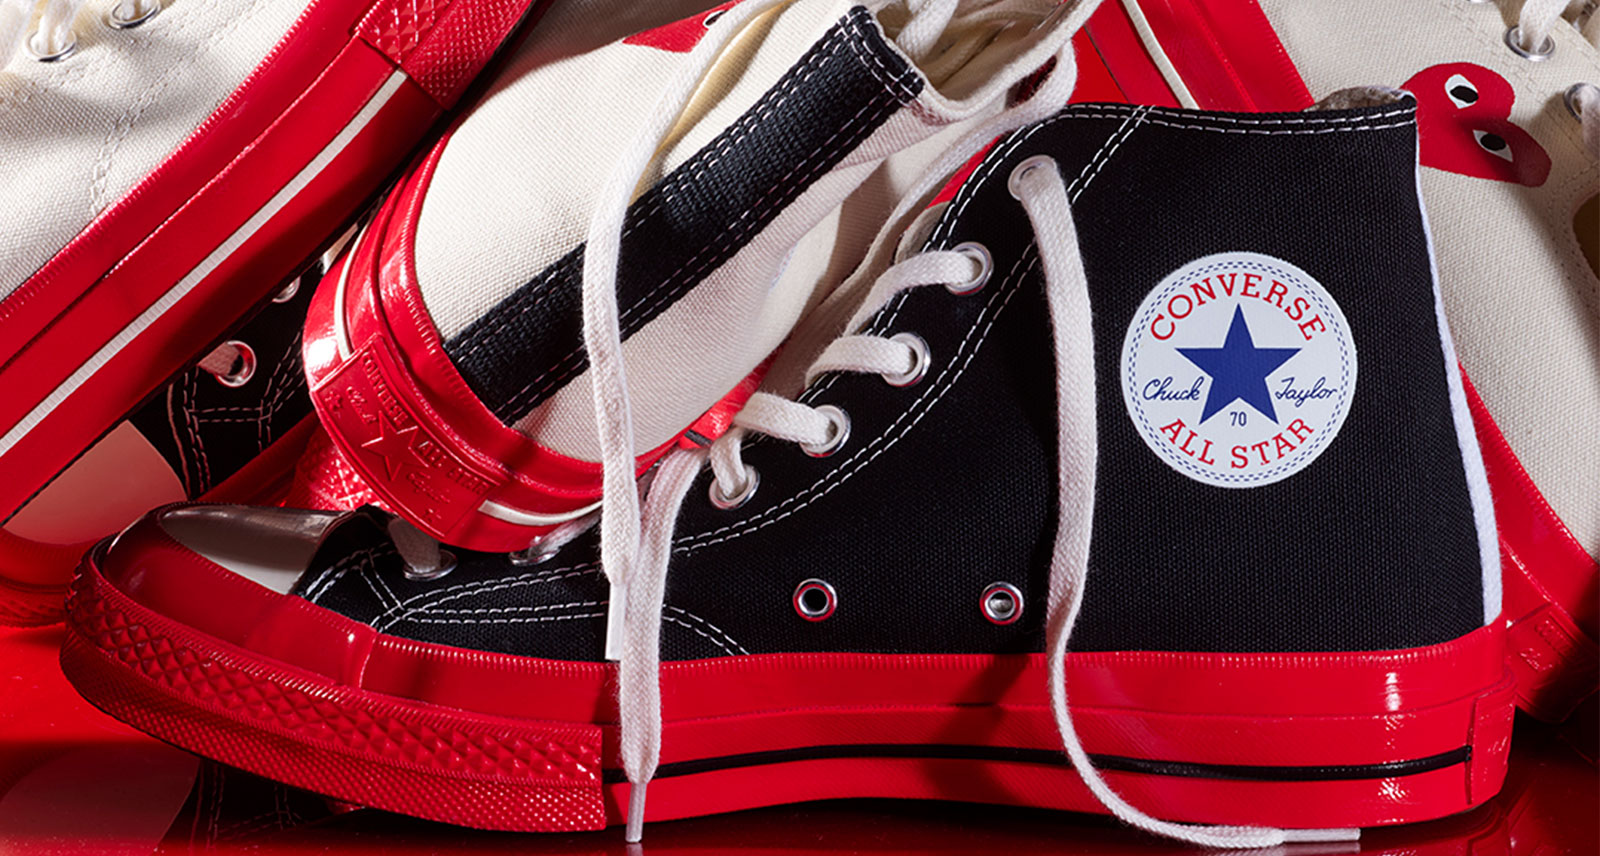 A Look at the Latest Converse X PLAY Comme Des Garçons Collab